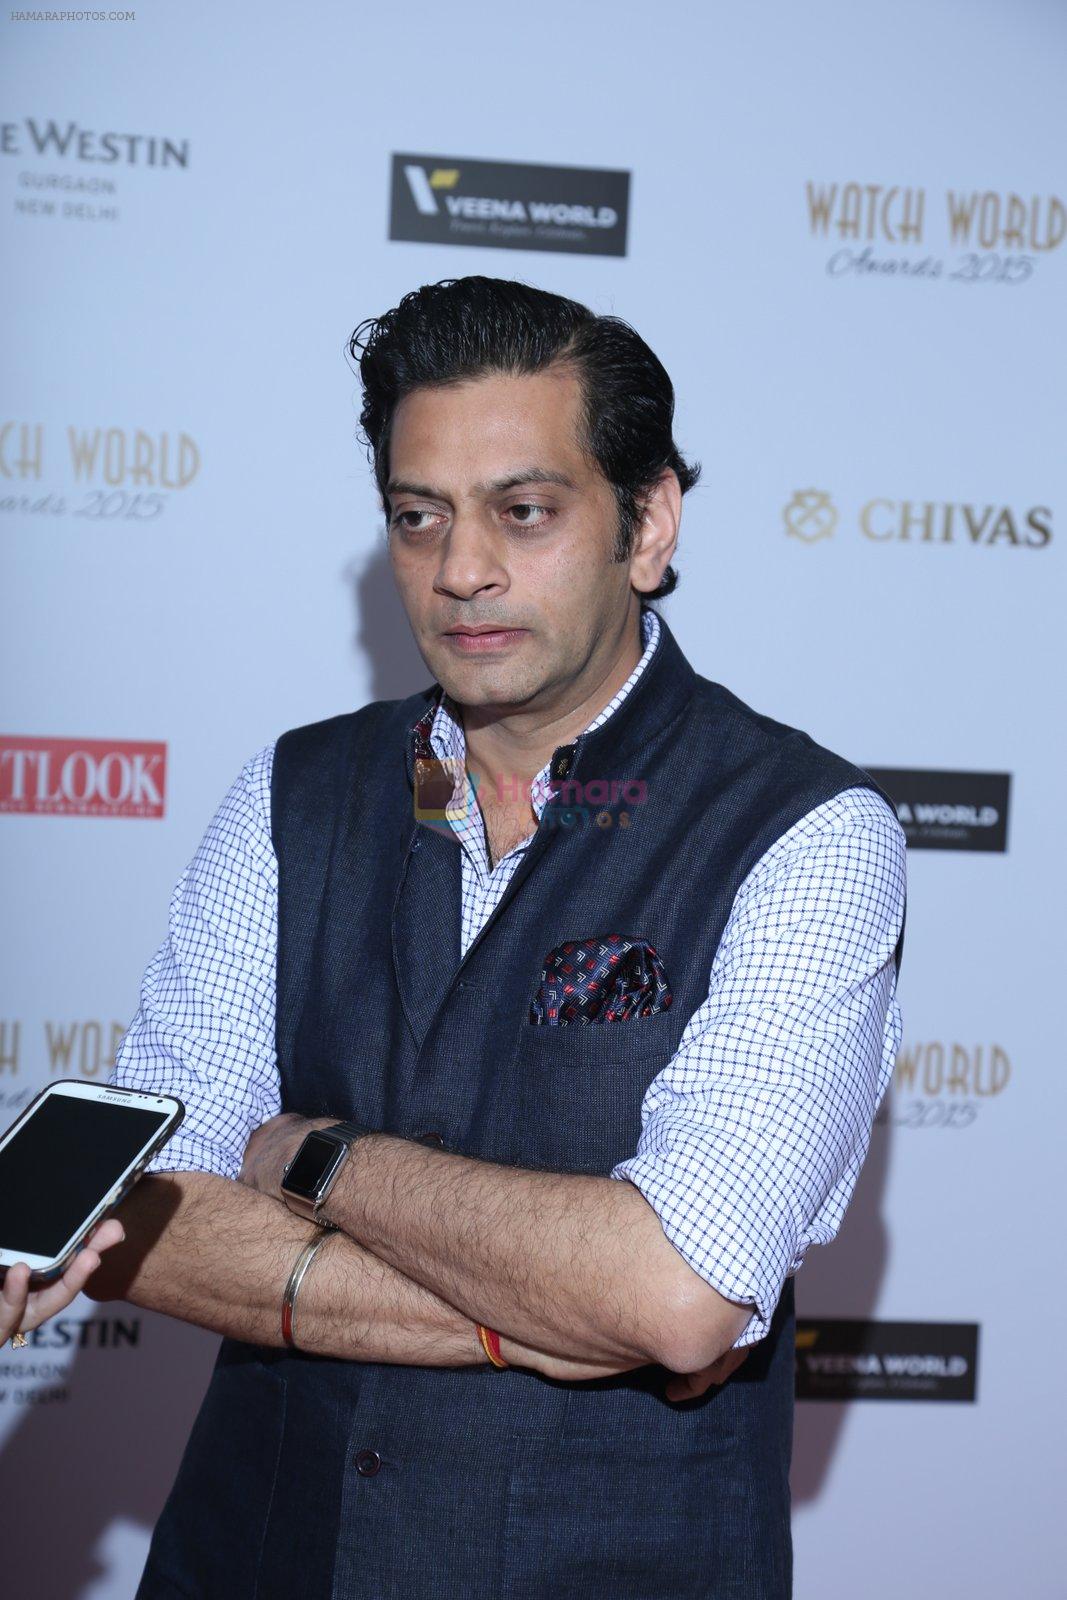 at Watch world Awards on 11th Oct 2015